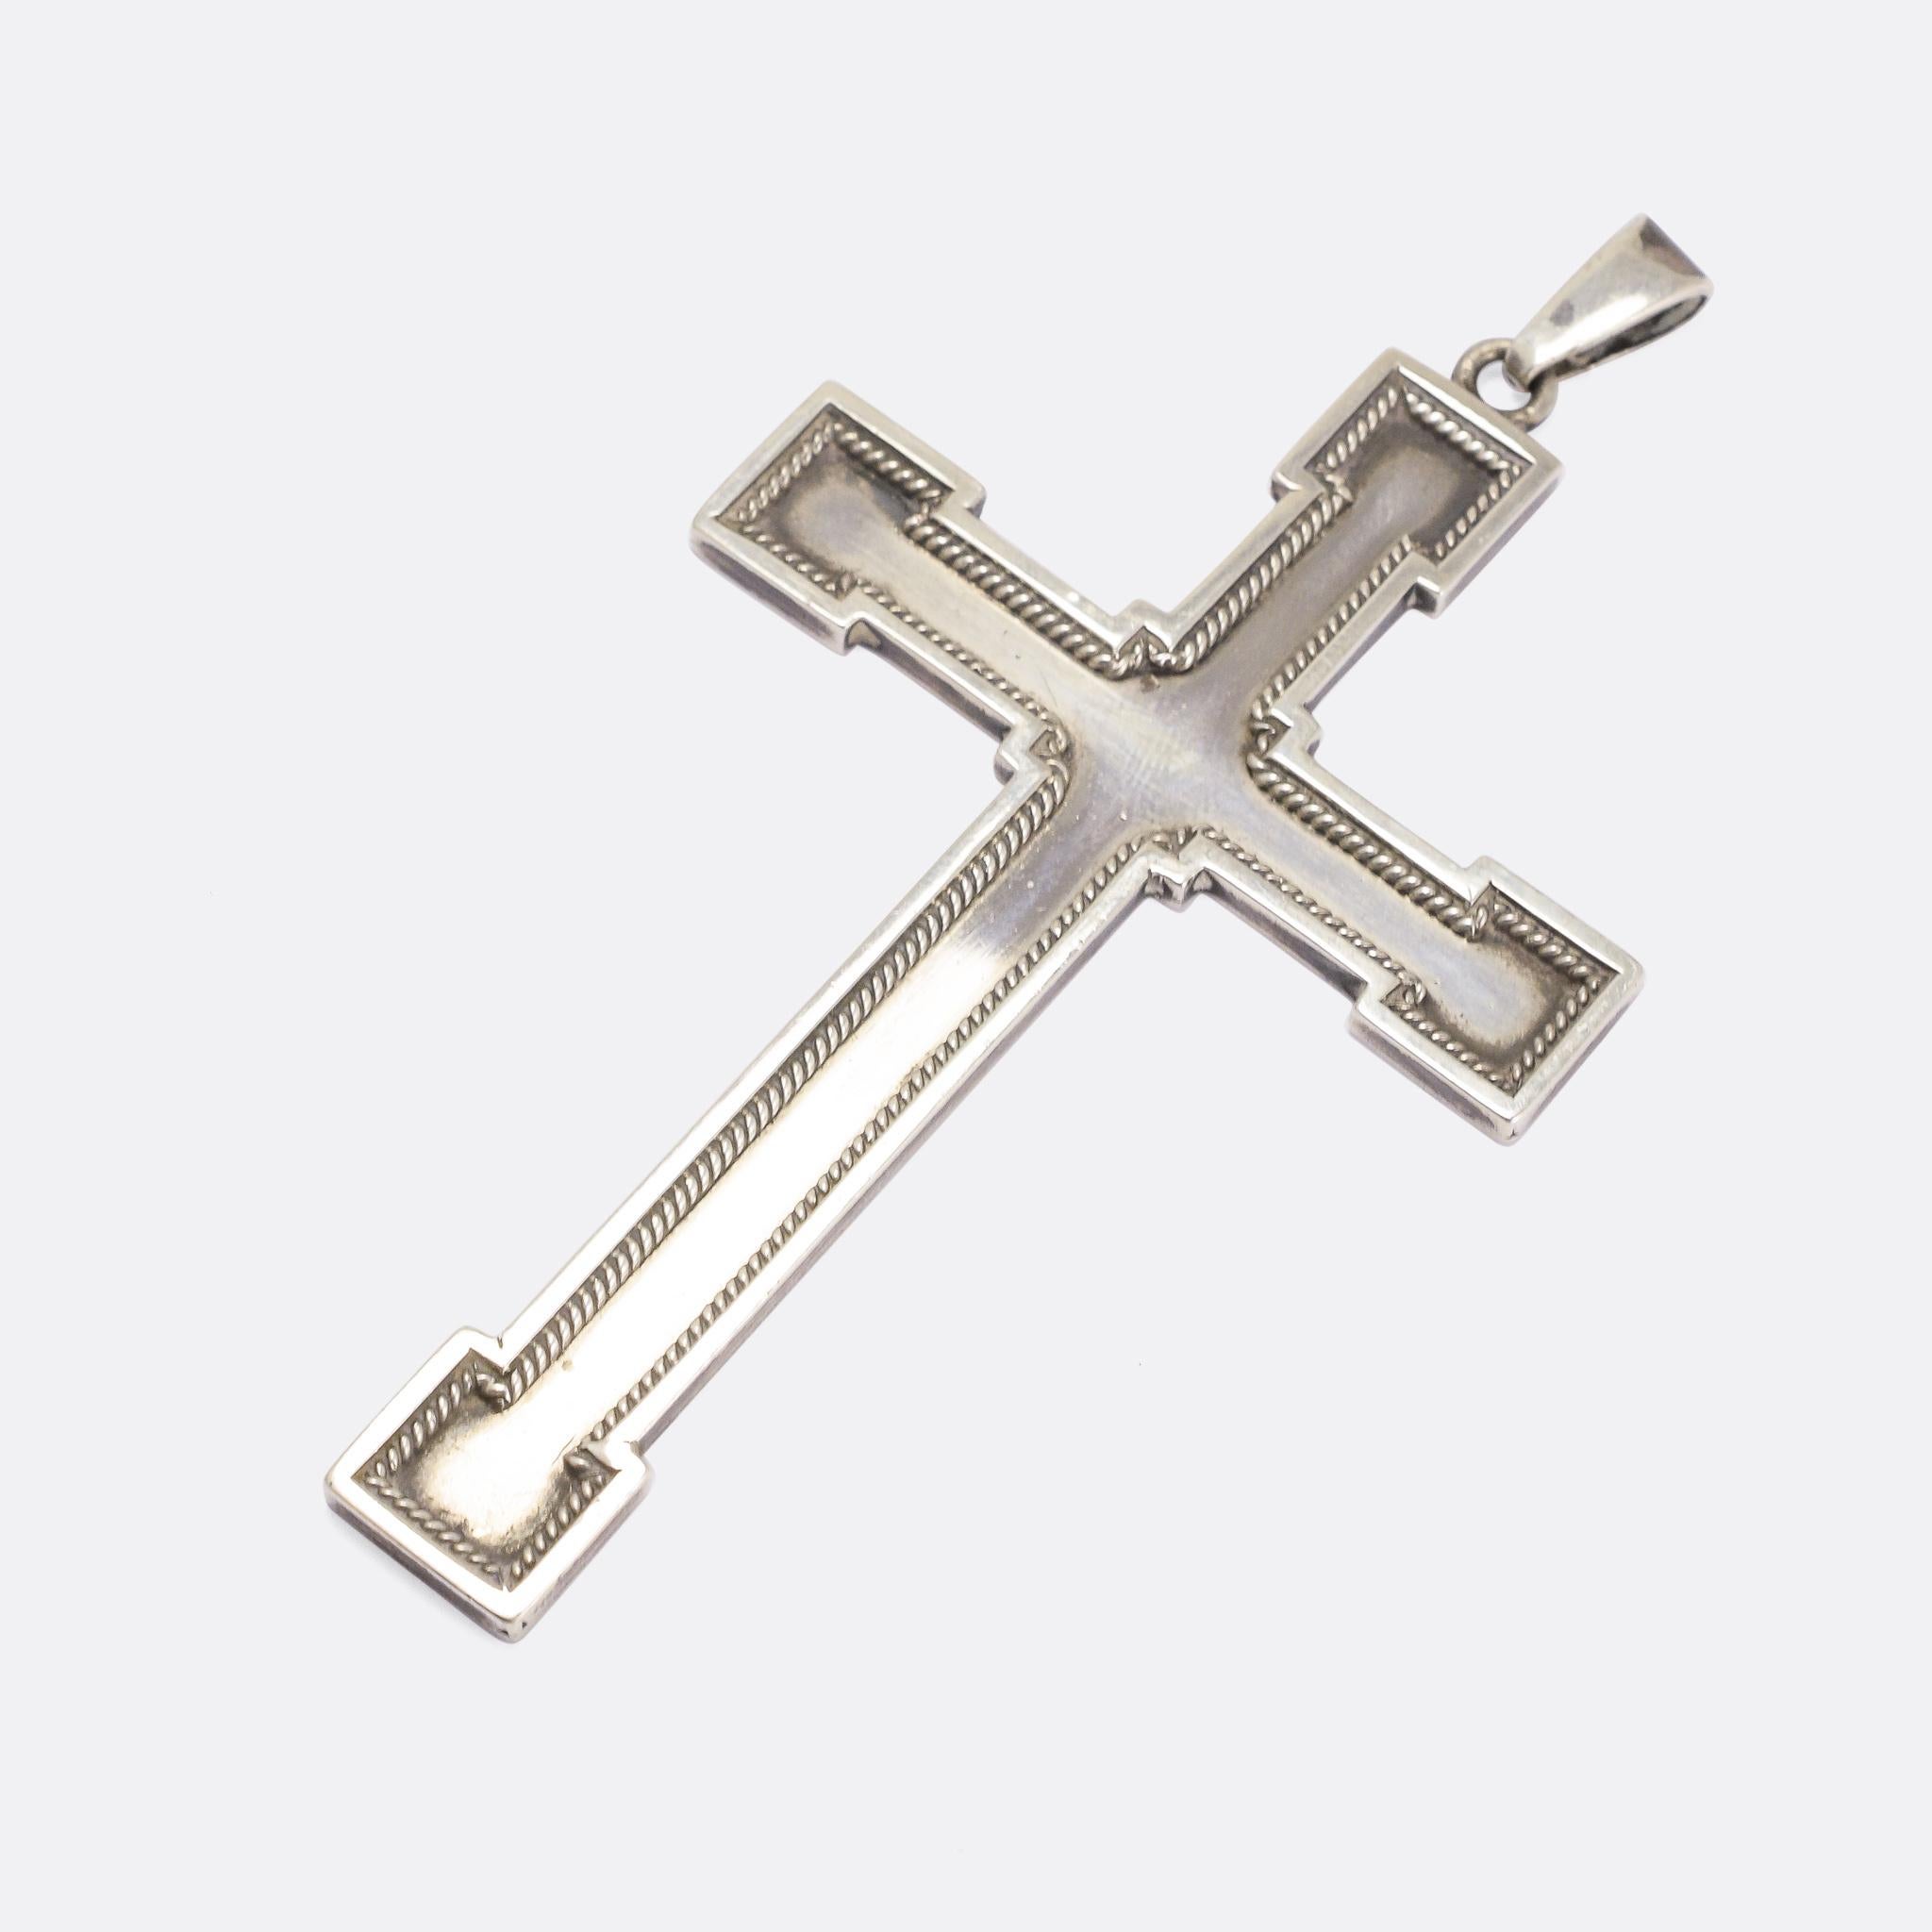 A large silver cross pendant with applied ropework adornment around the outer border. It's crafted in sterling silver, and dates from the year 1945 - with the date July 25th inscribed on the back. A great statement piece that's developed a beautiful